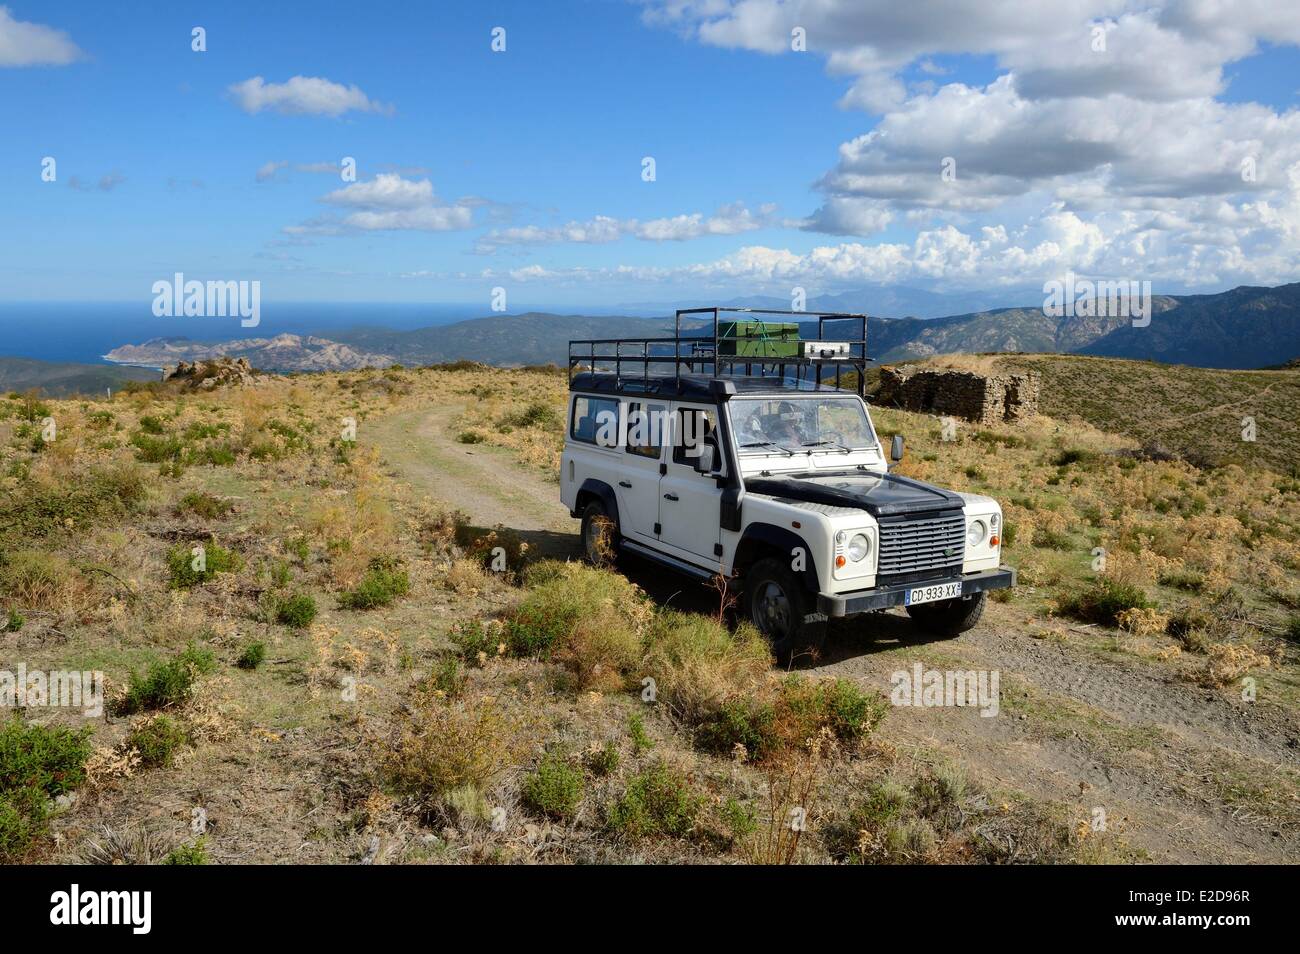 France, Haute Corse, Balagne, discovery of the Giussani in 4x4 vehicle using tracks Stock Photo